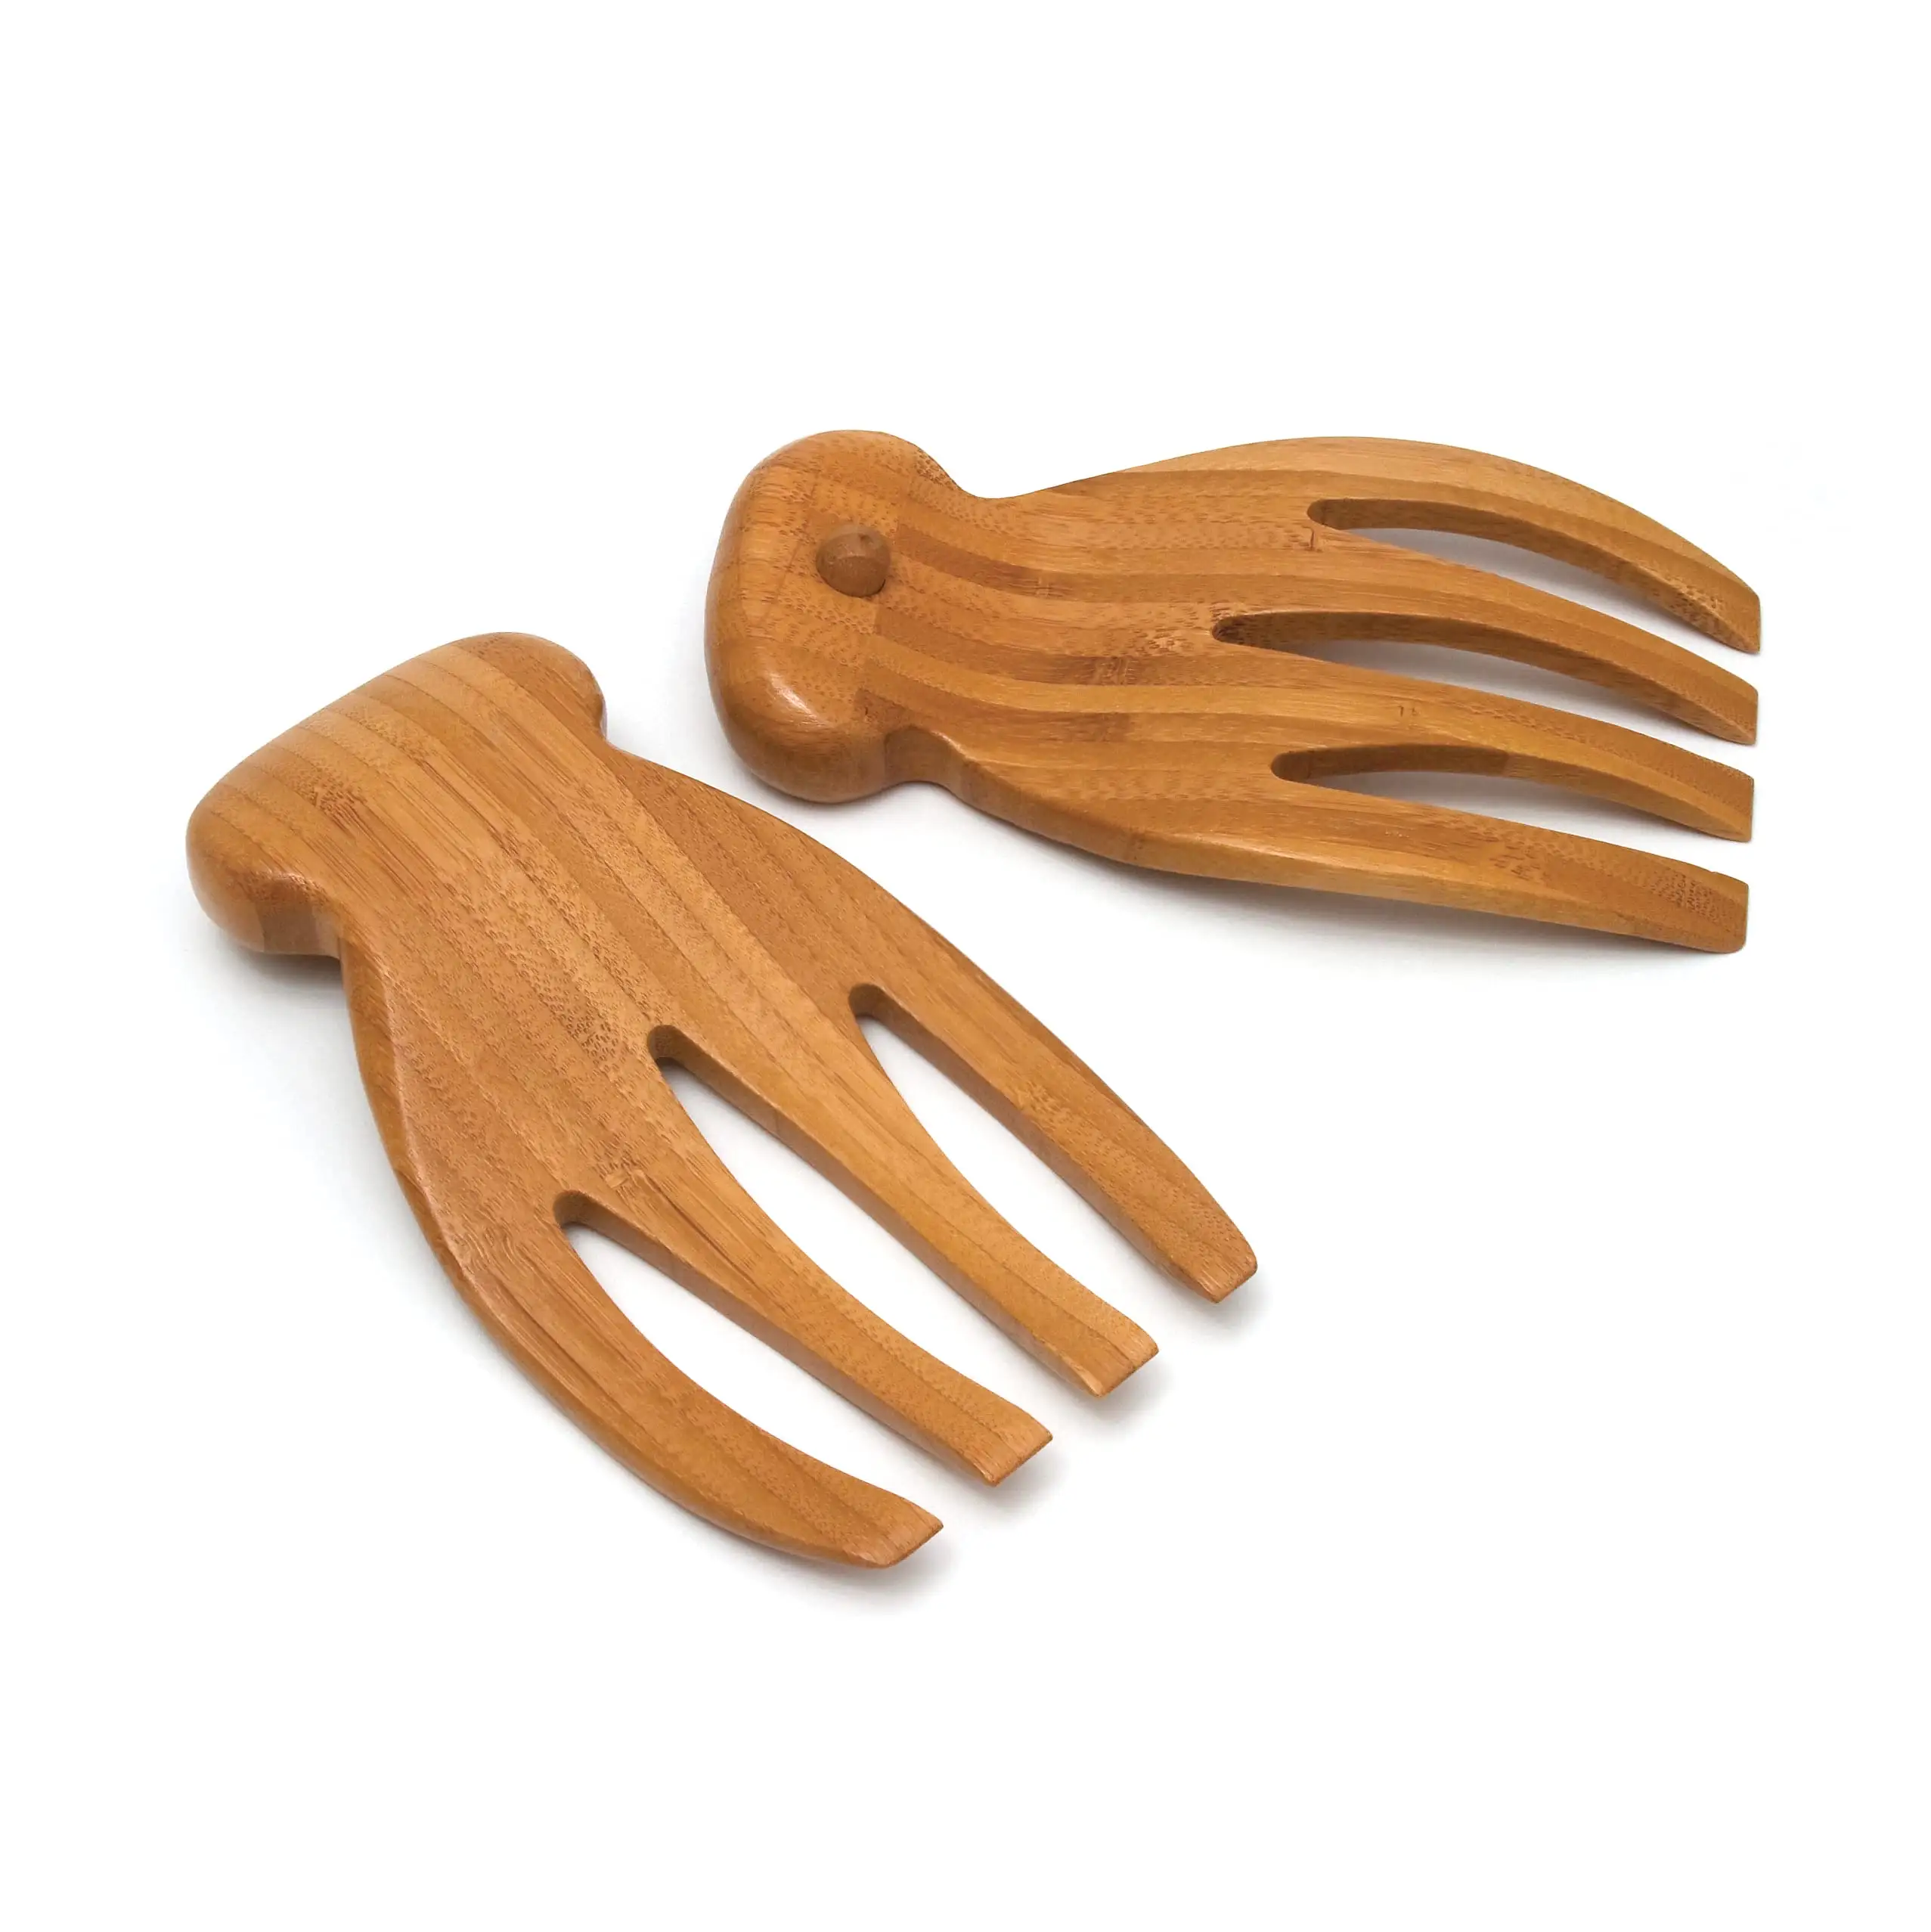 Wooden salad serving spoon hand fork fruits and pasta and noodles use Kitchen & Tabletop wood salad hand fork